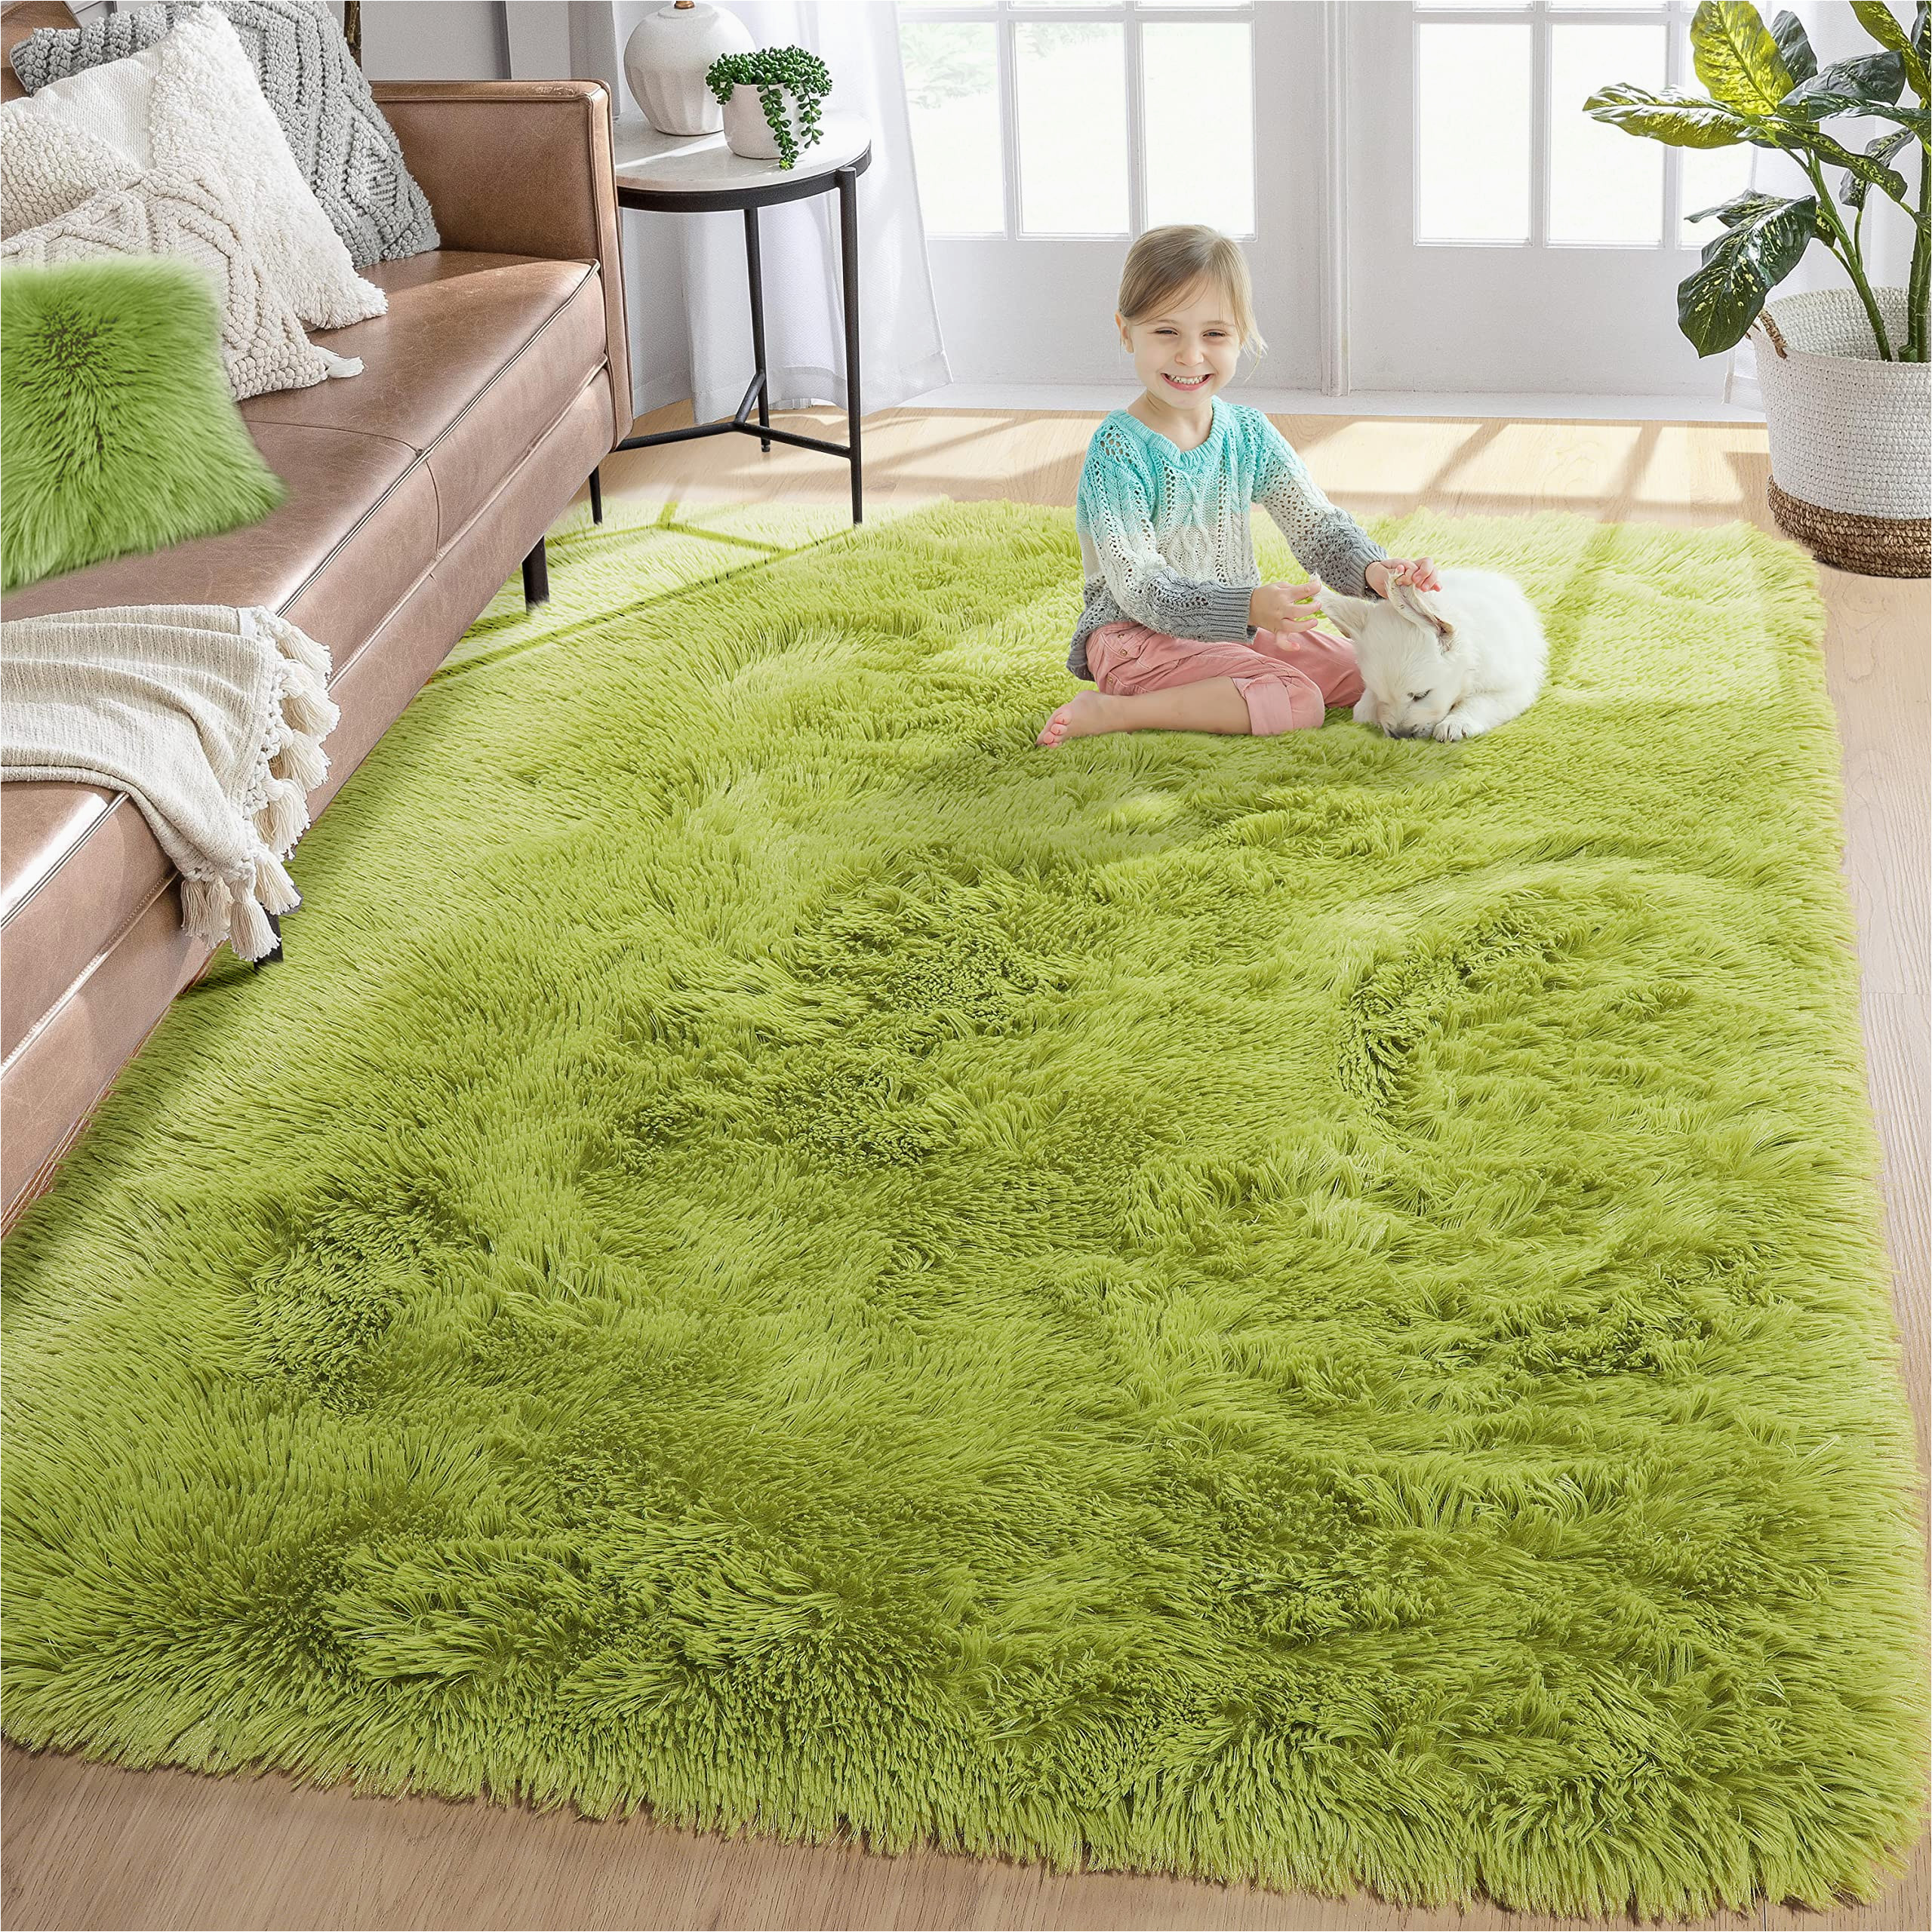 4 X 6 Green area Rugs Green soft area Rug for Bedroom,4×6,fluffy Rugs,shag Carpet for Living Room,fuzzy Rug for Kids Baby Room,furry Rug for Girls Boys Room,large Anti-slip …